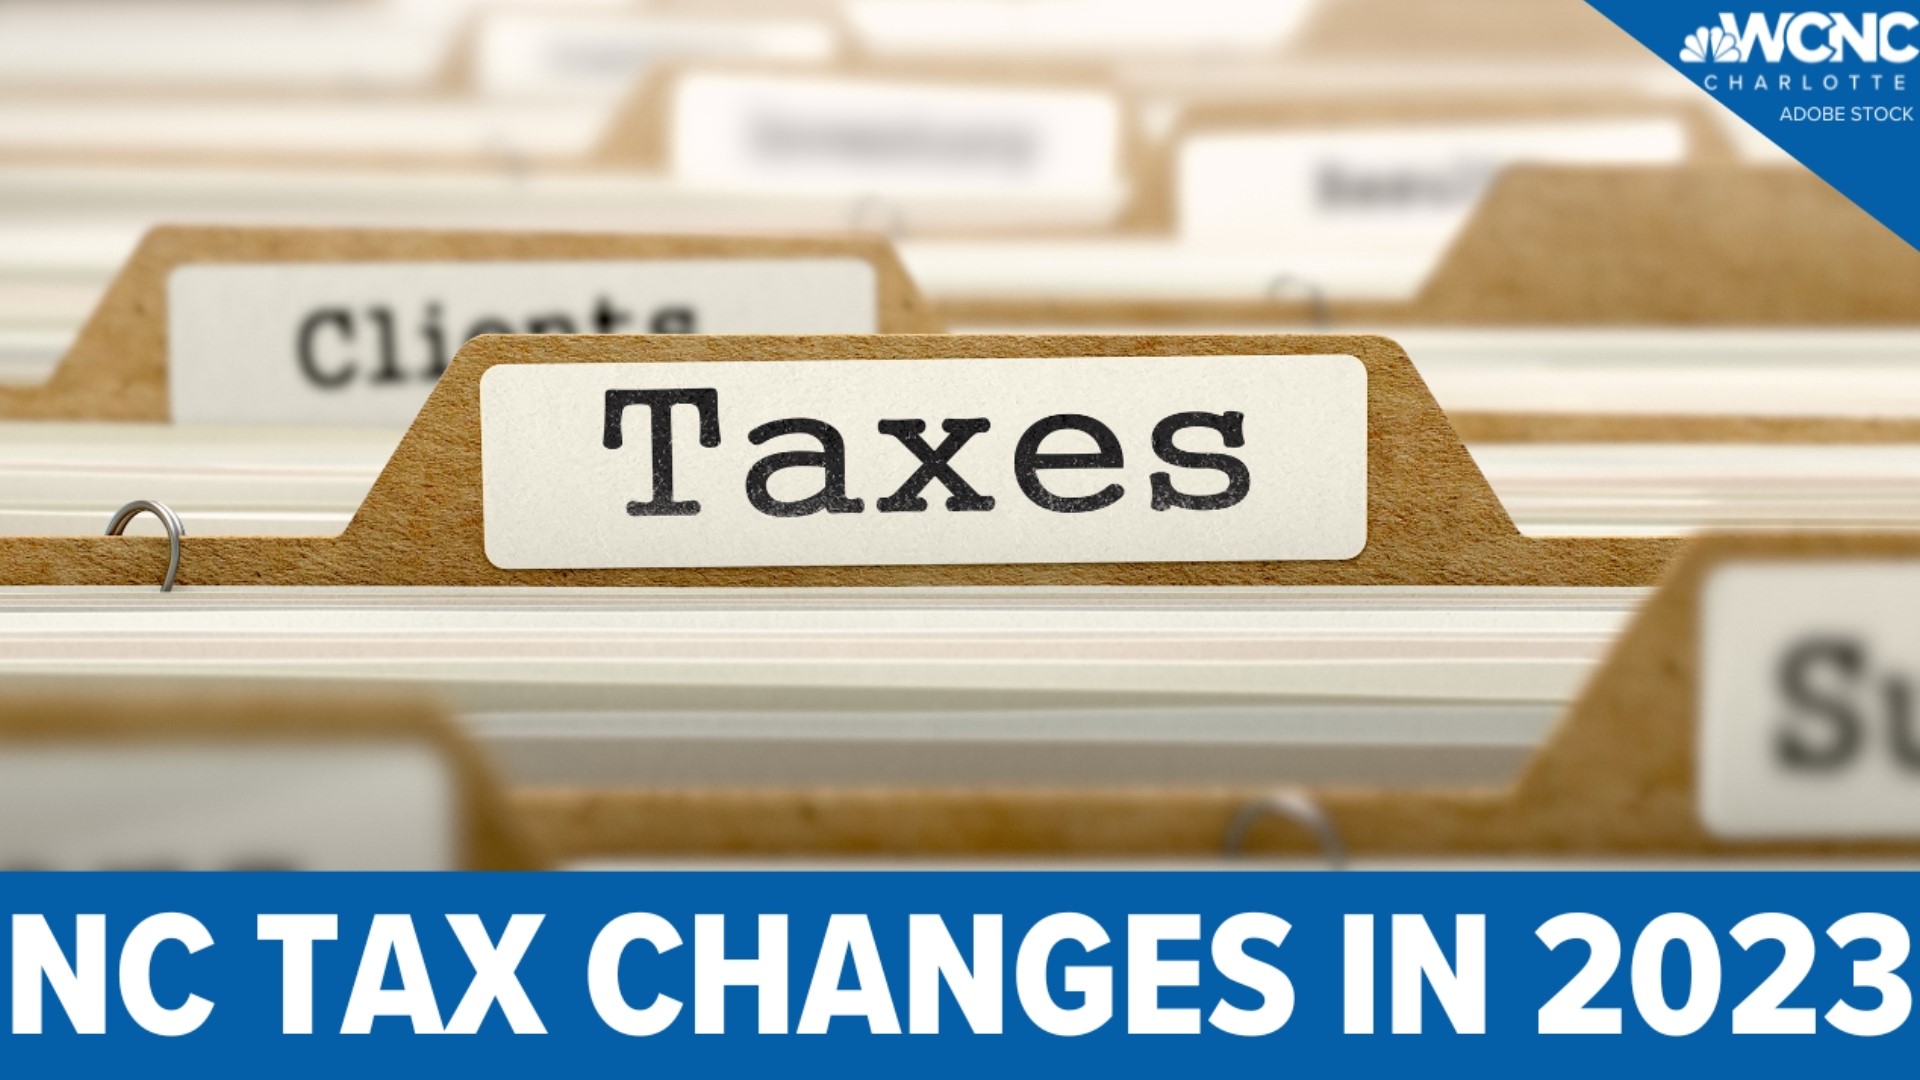 As the new year begins, there are some new tax rules that are going to take effect.